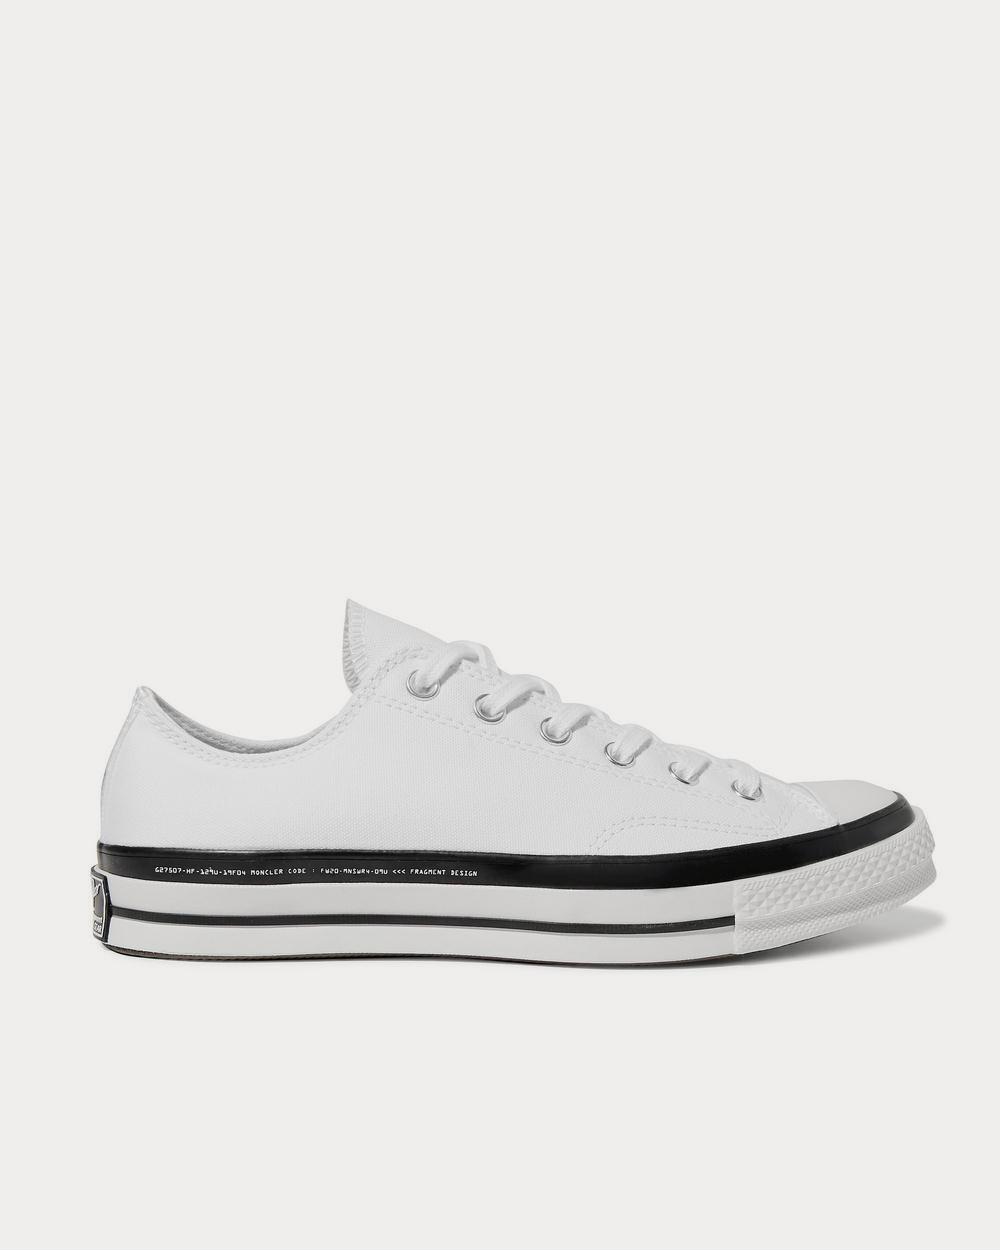 Moncler 7 Moncler Fragment + Converse Chuck 70 Ox Canvas White low top  sneakers - Sneak in Peace